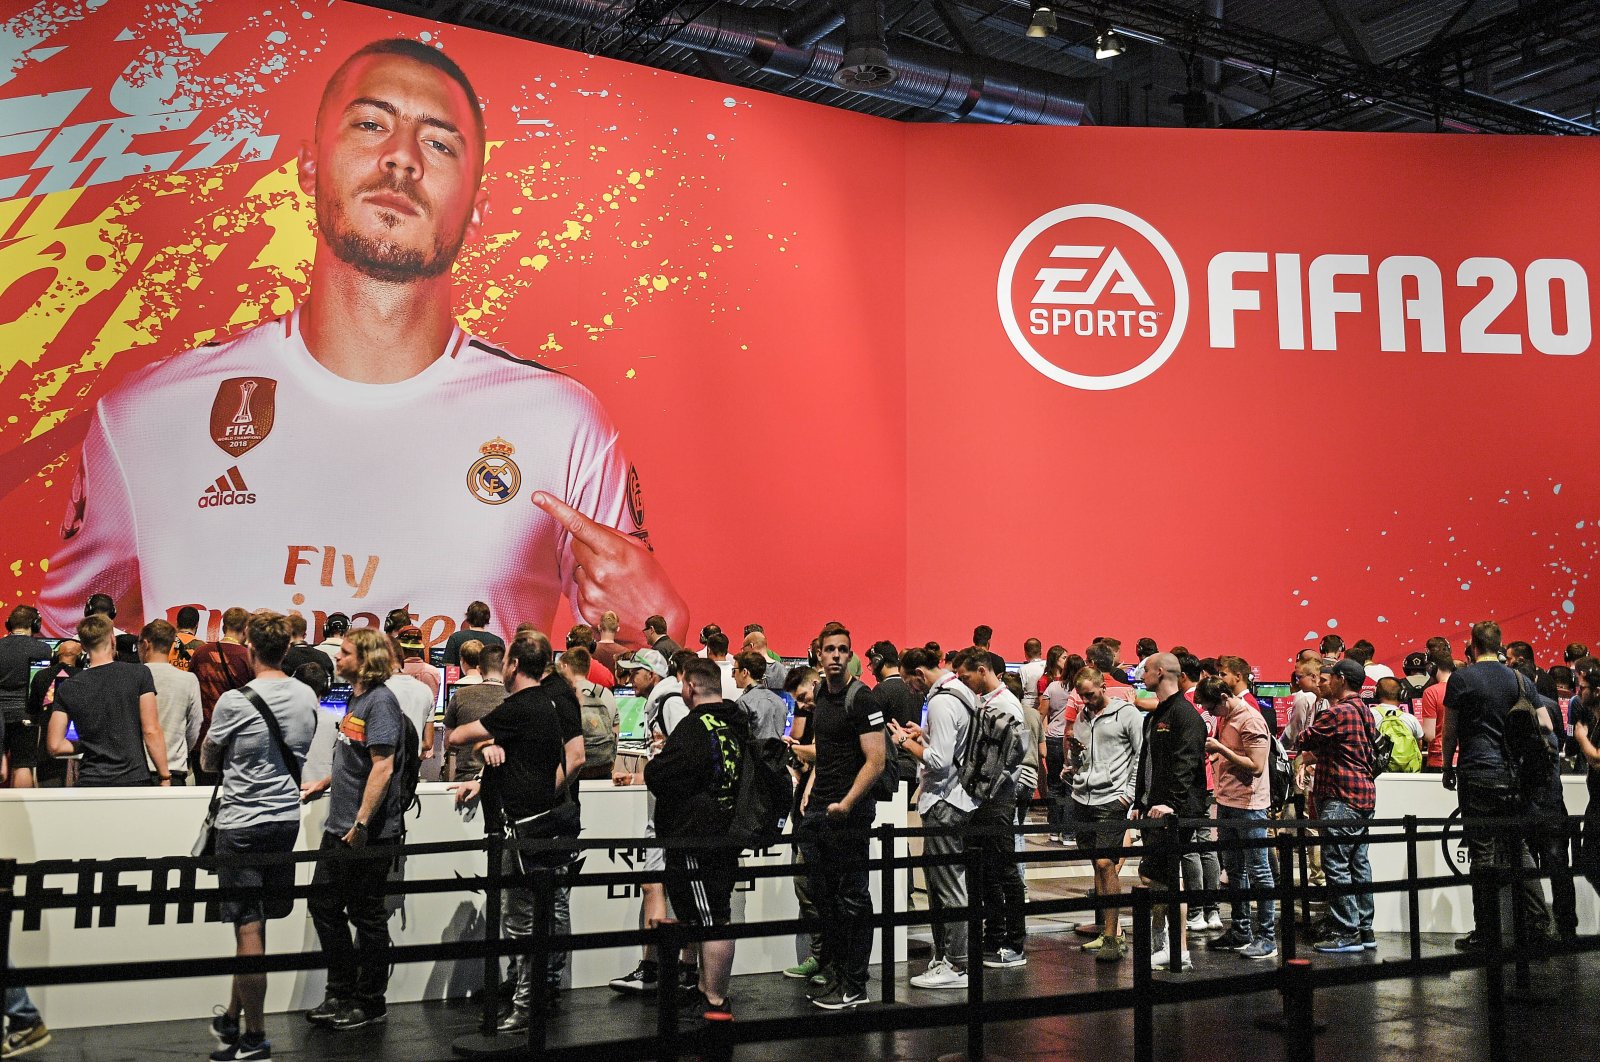 People attend an EA Sports event at the Gamescom, Cologne, Germany, Aug. 20, 2019. (AP Photo)